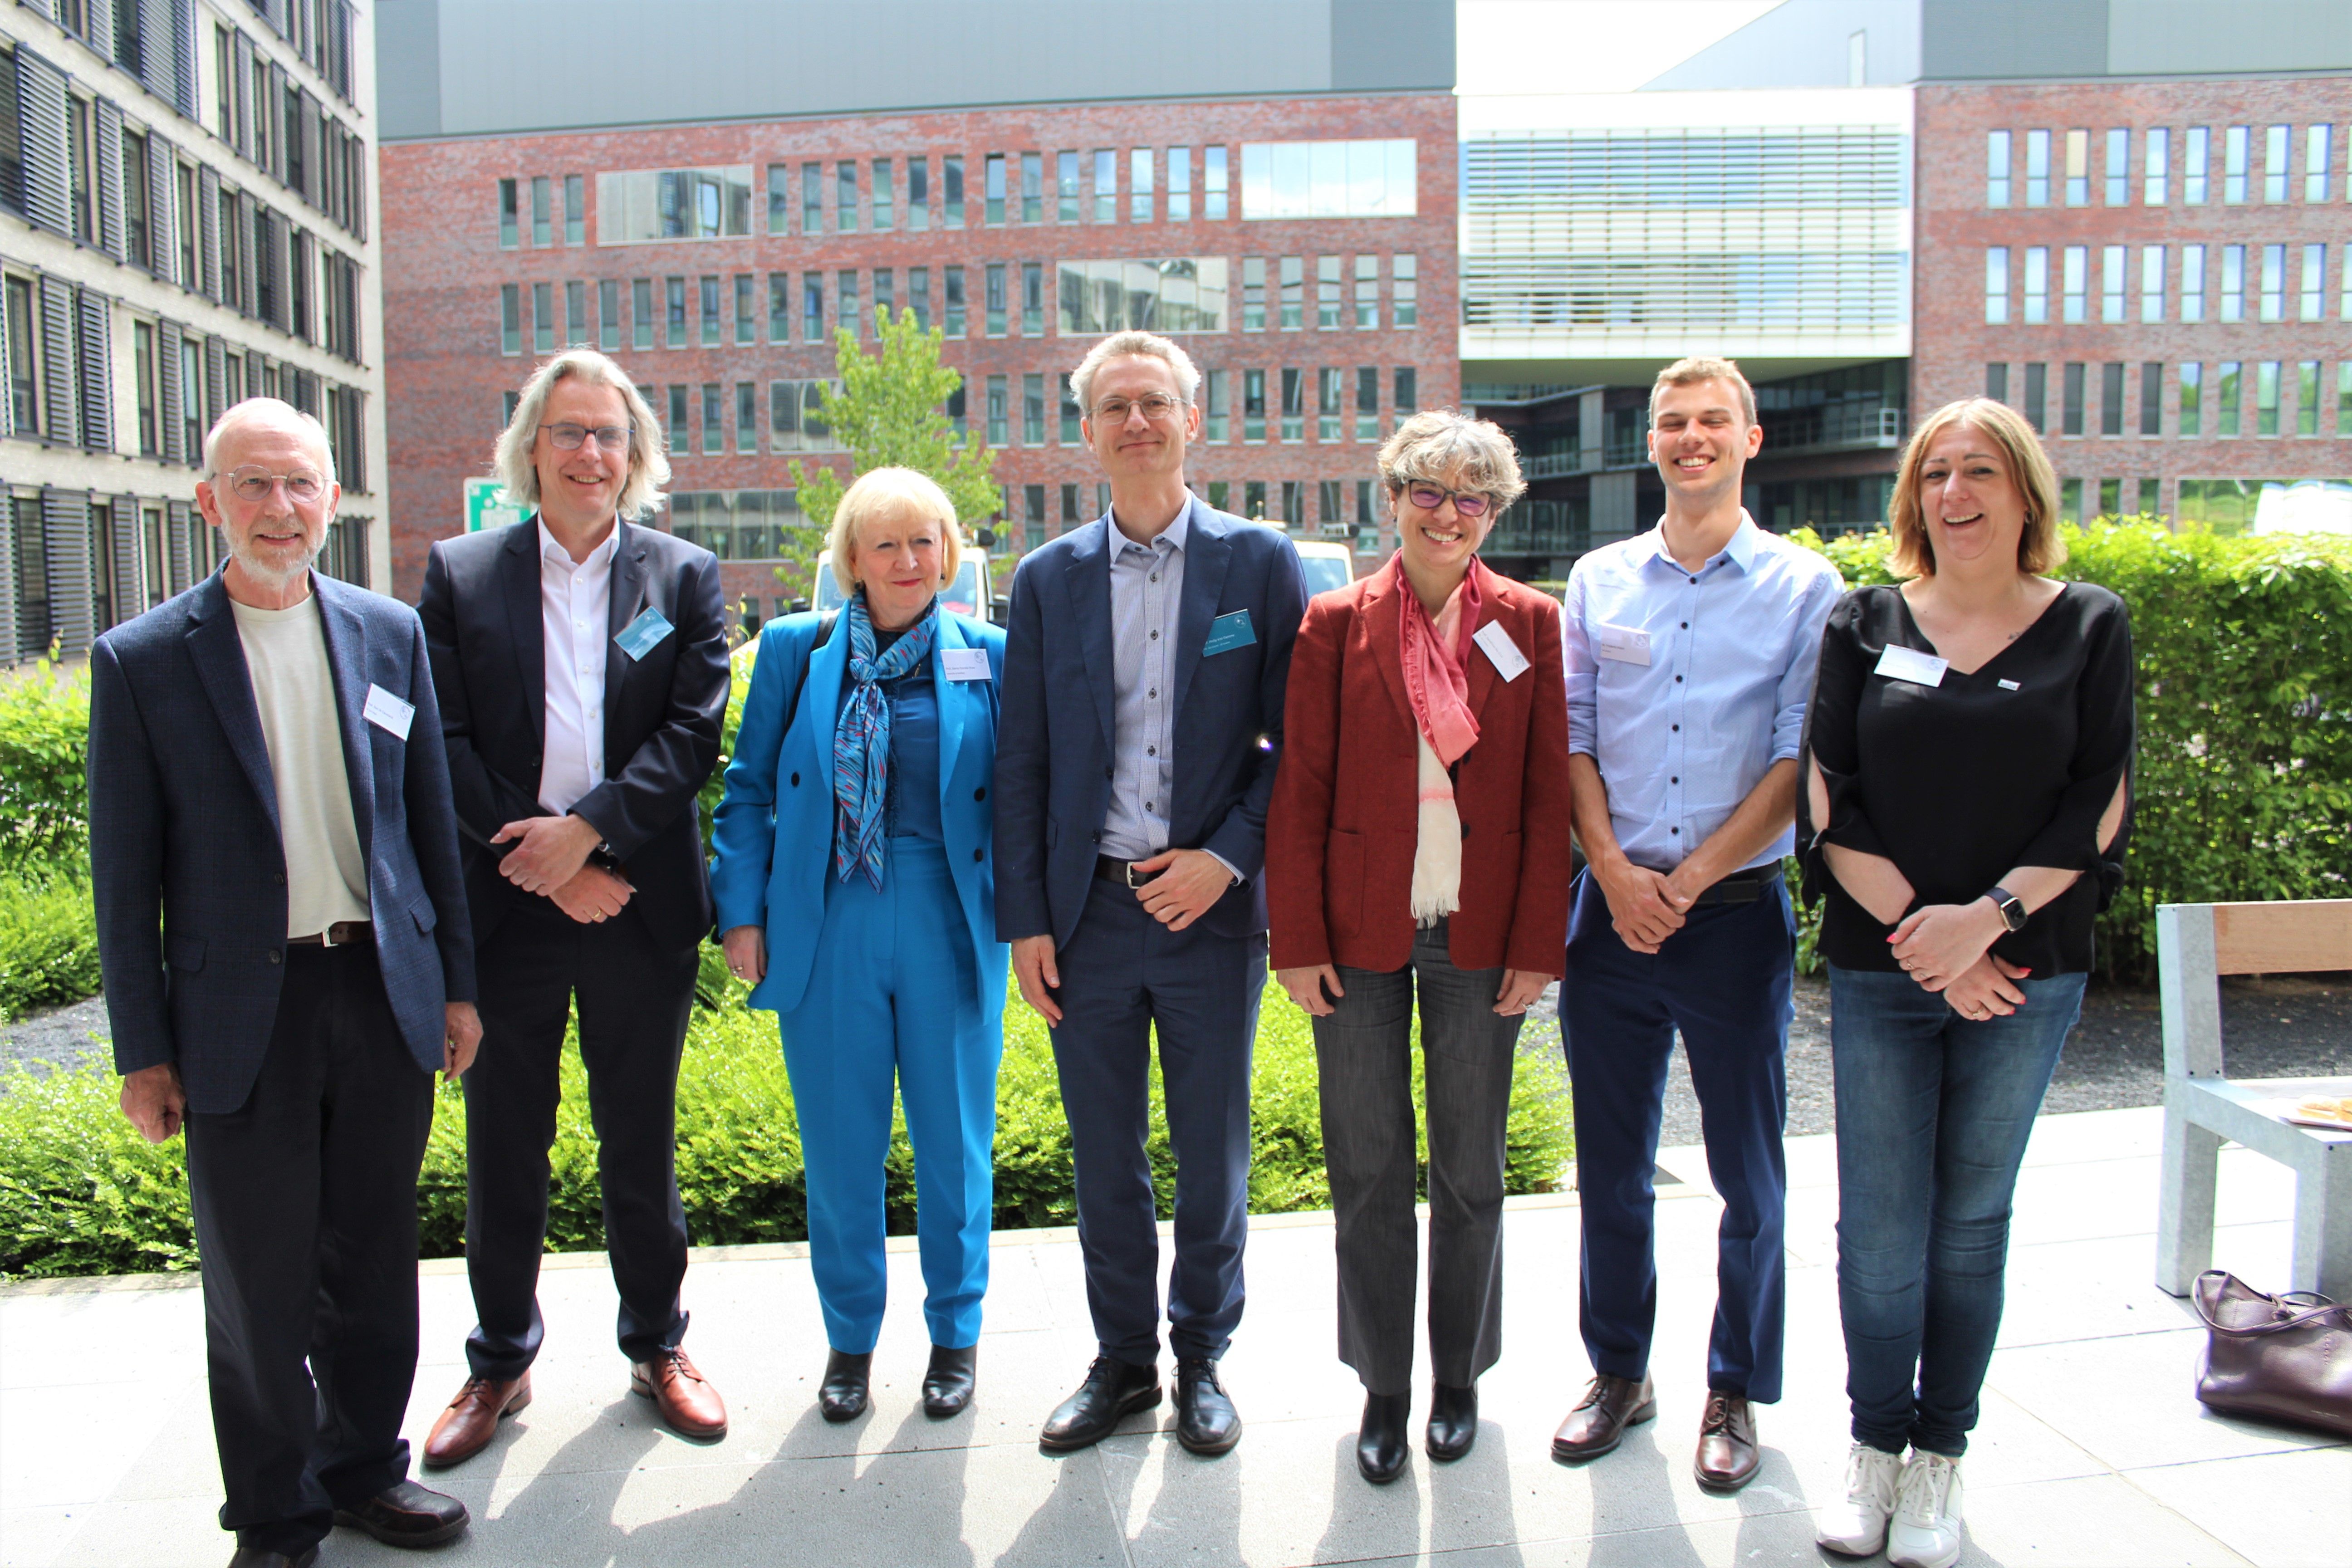 Speakers at the LEUCALS launch, including keynote speakers Prof. Dame Pamela Shaw (University of Sheffield, UK) and Prof. Don Cleveland (UC San Diego, US), and ALS Liga CEO & Chairwoman Evy Reviers